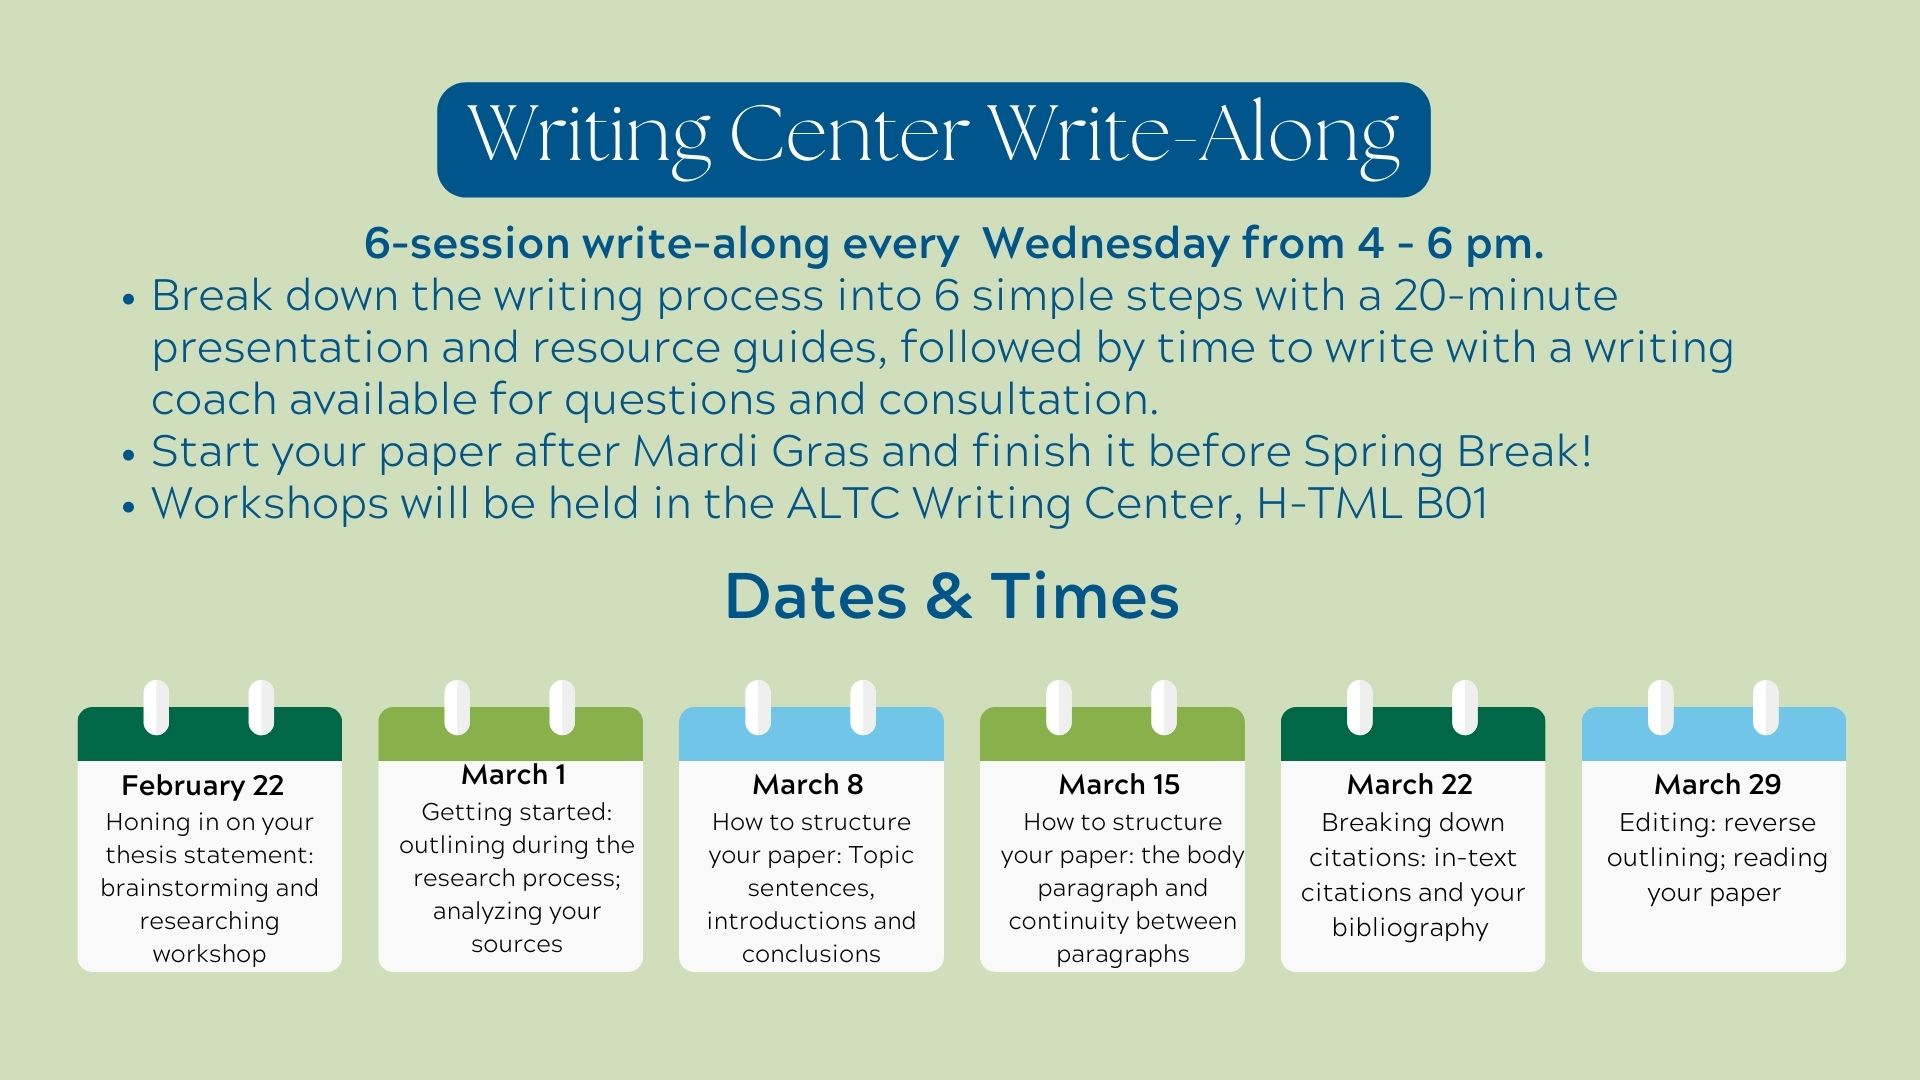 Writing Center Drop-In Sessions